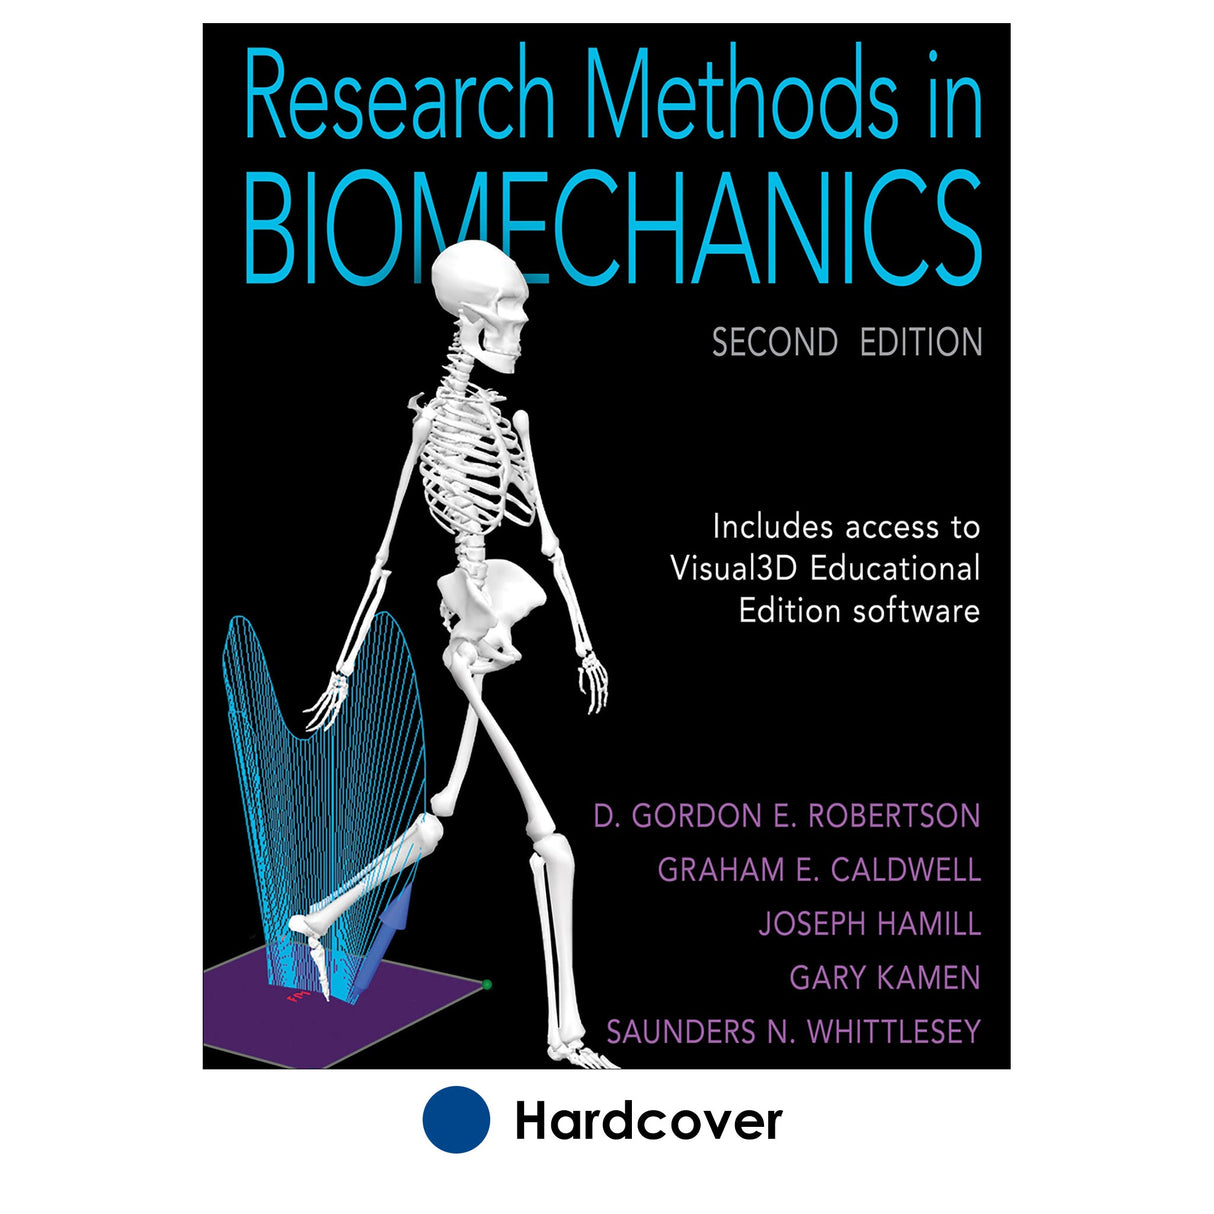 Research Methods in Biomechanics-2nd Edition